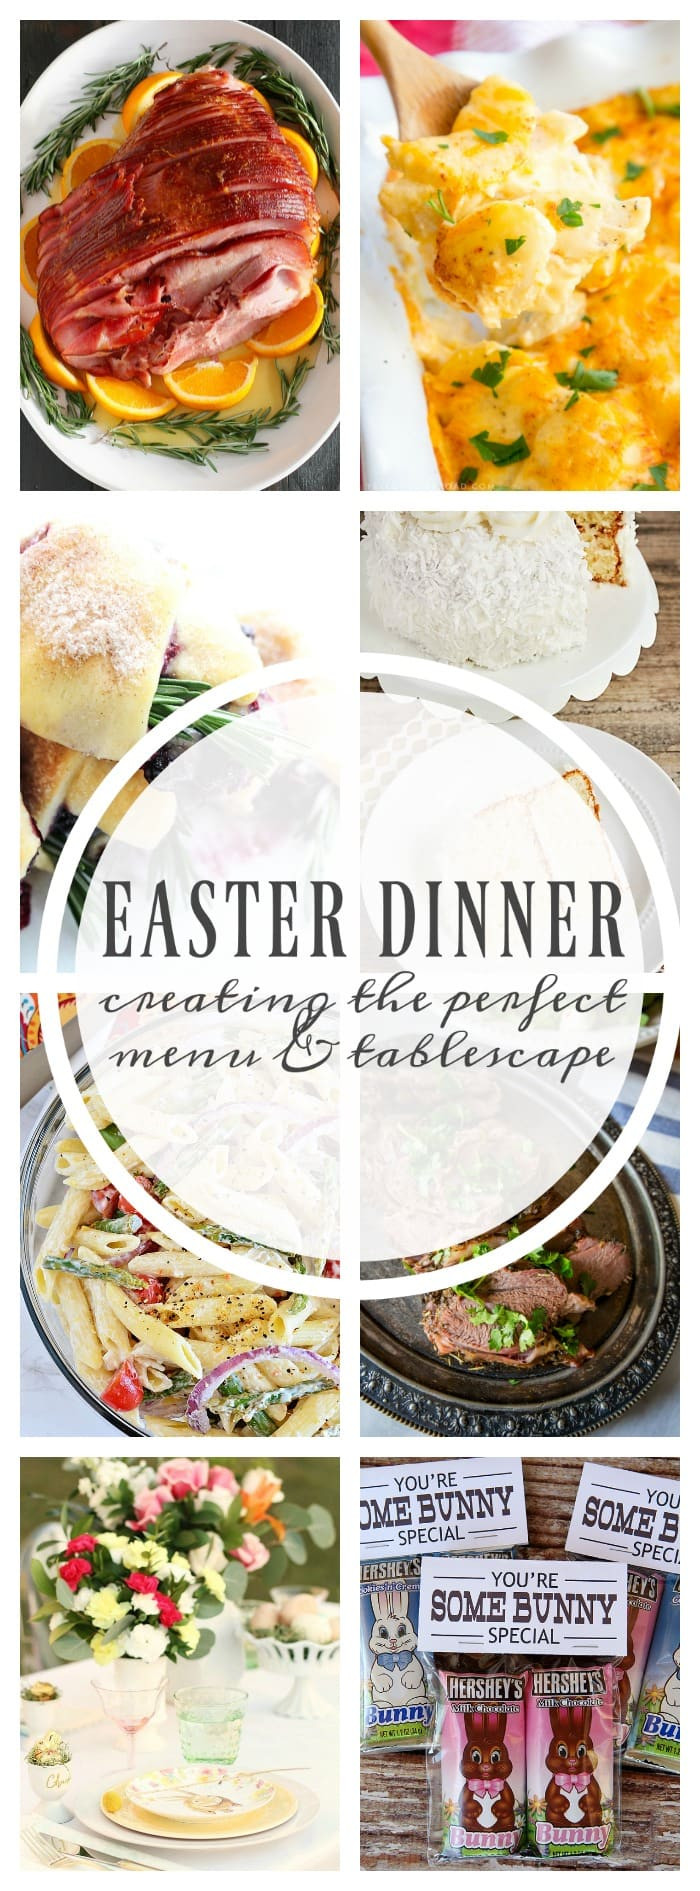 Easter Dinner Menus
 EASTER DINNER CREATING THE PERFECT MENU & TABLESCAPE A